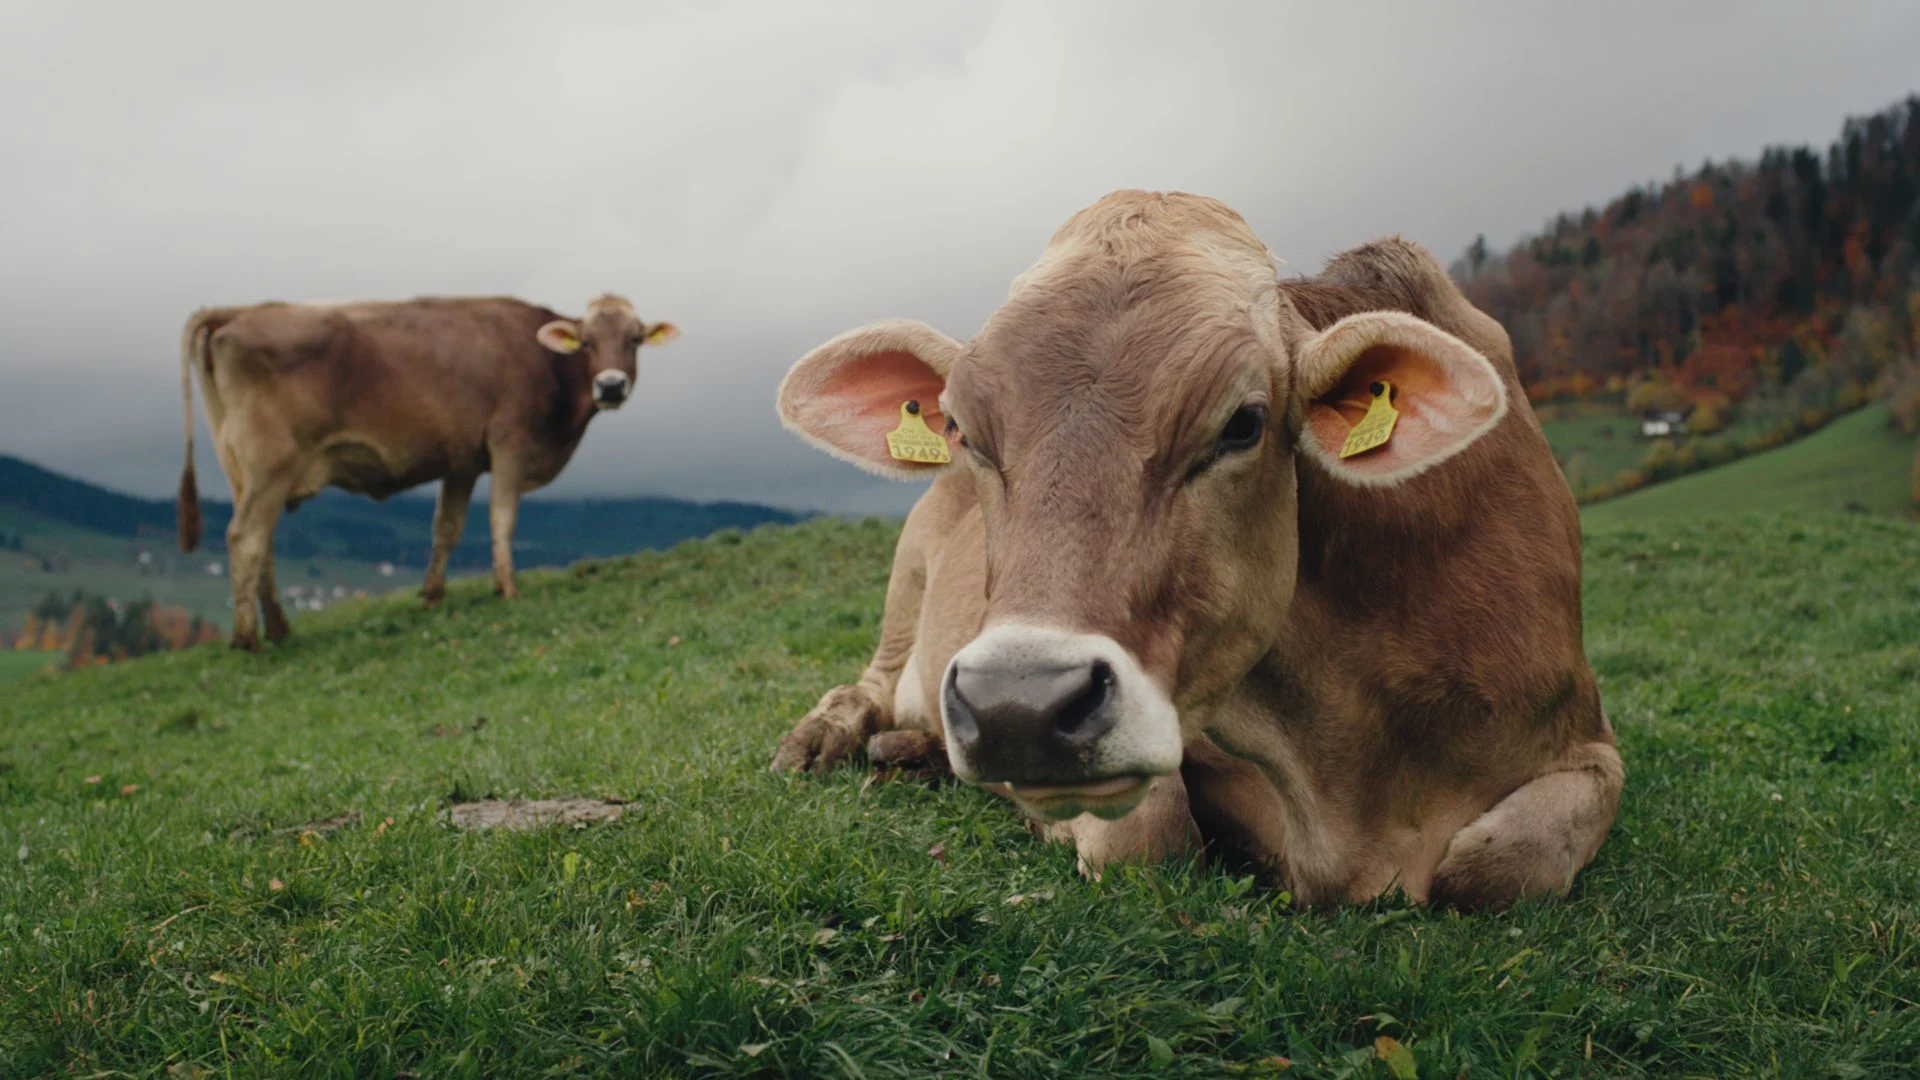 A cow in a pasture looks closely at the camera